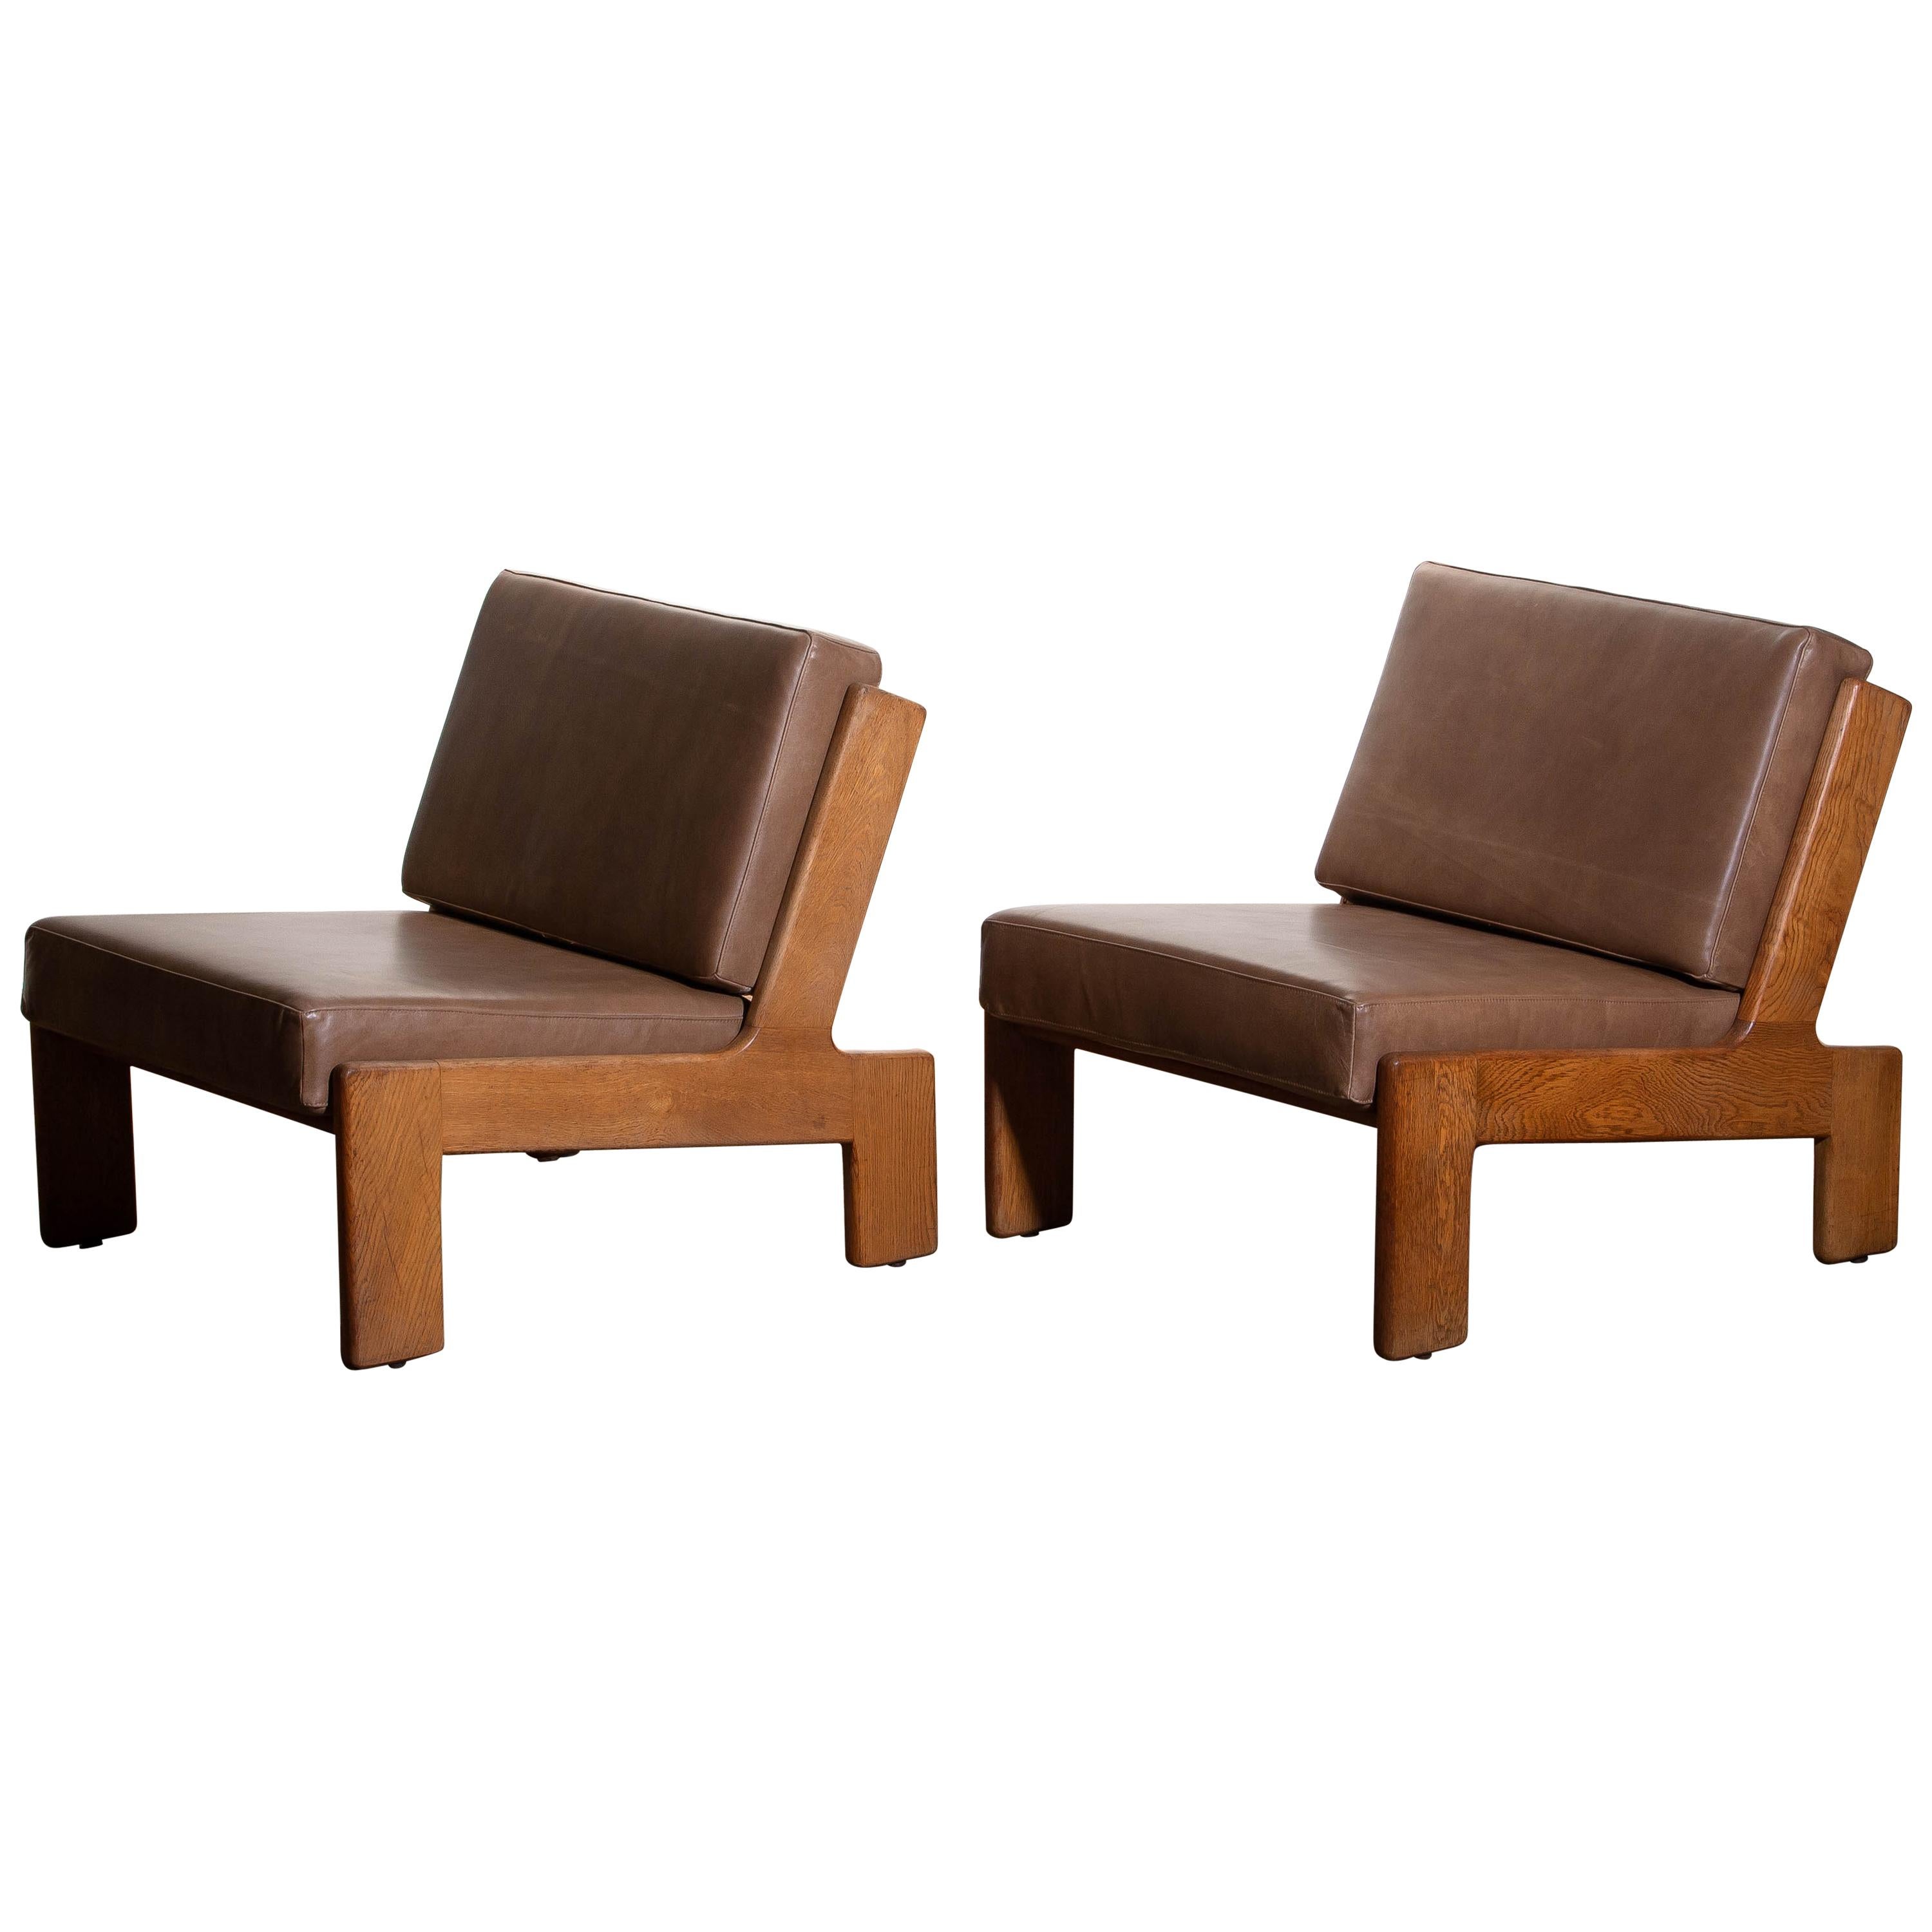 Finnish 1960, Pair of Oak and Leather Cubist Lounge Chairs by Esko Pajamies for Asko